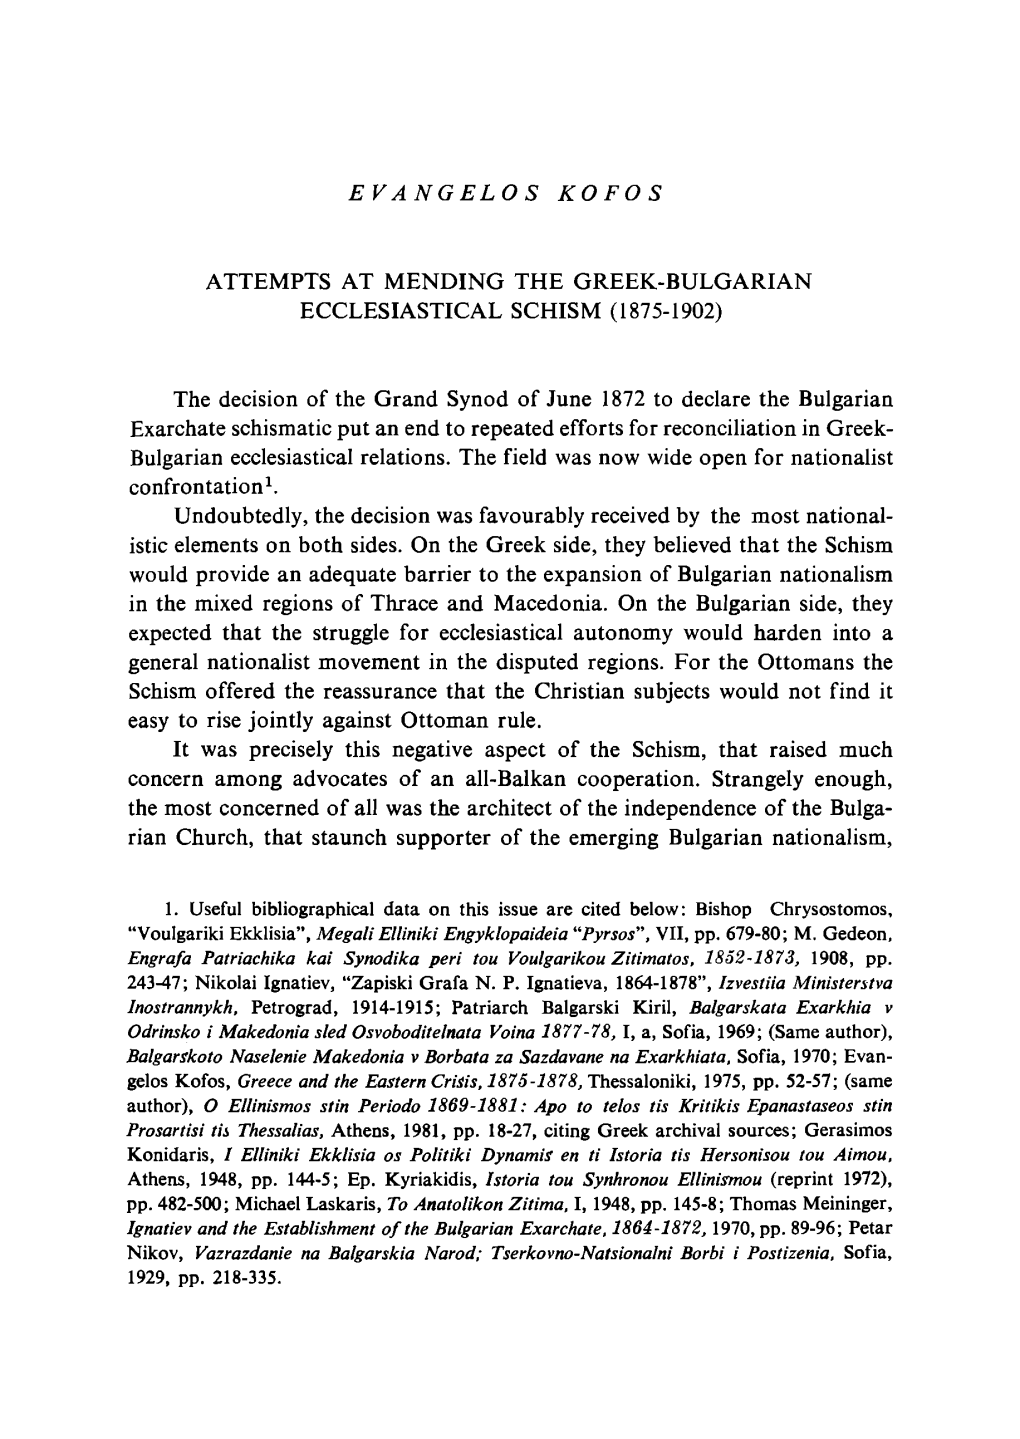 Attempts at Mending the Greek-Bulgarian Ecclesiastical Schism (1875-1902)